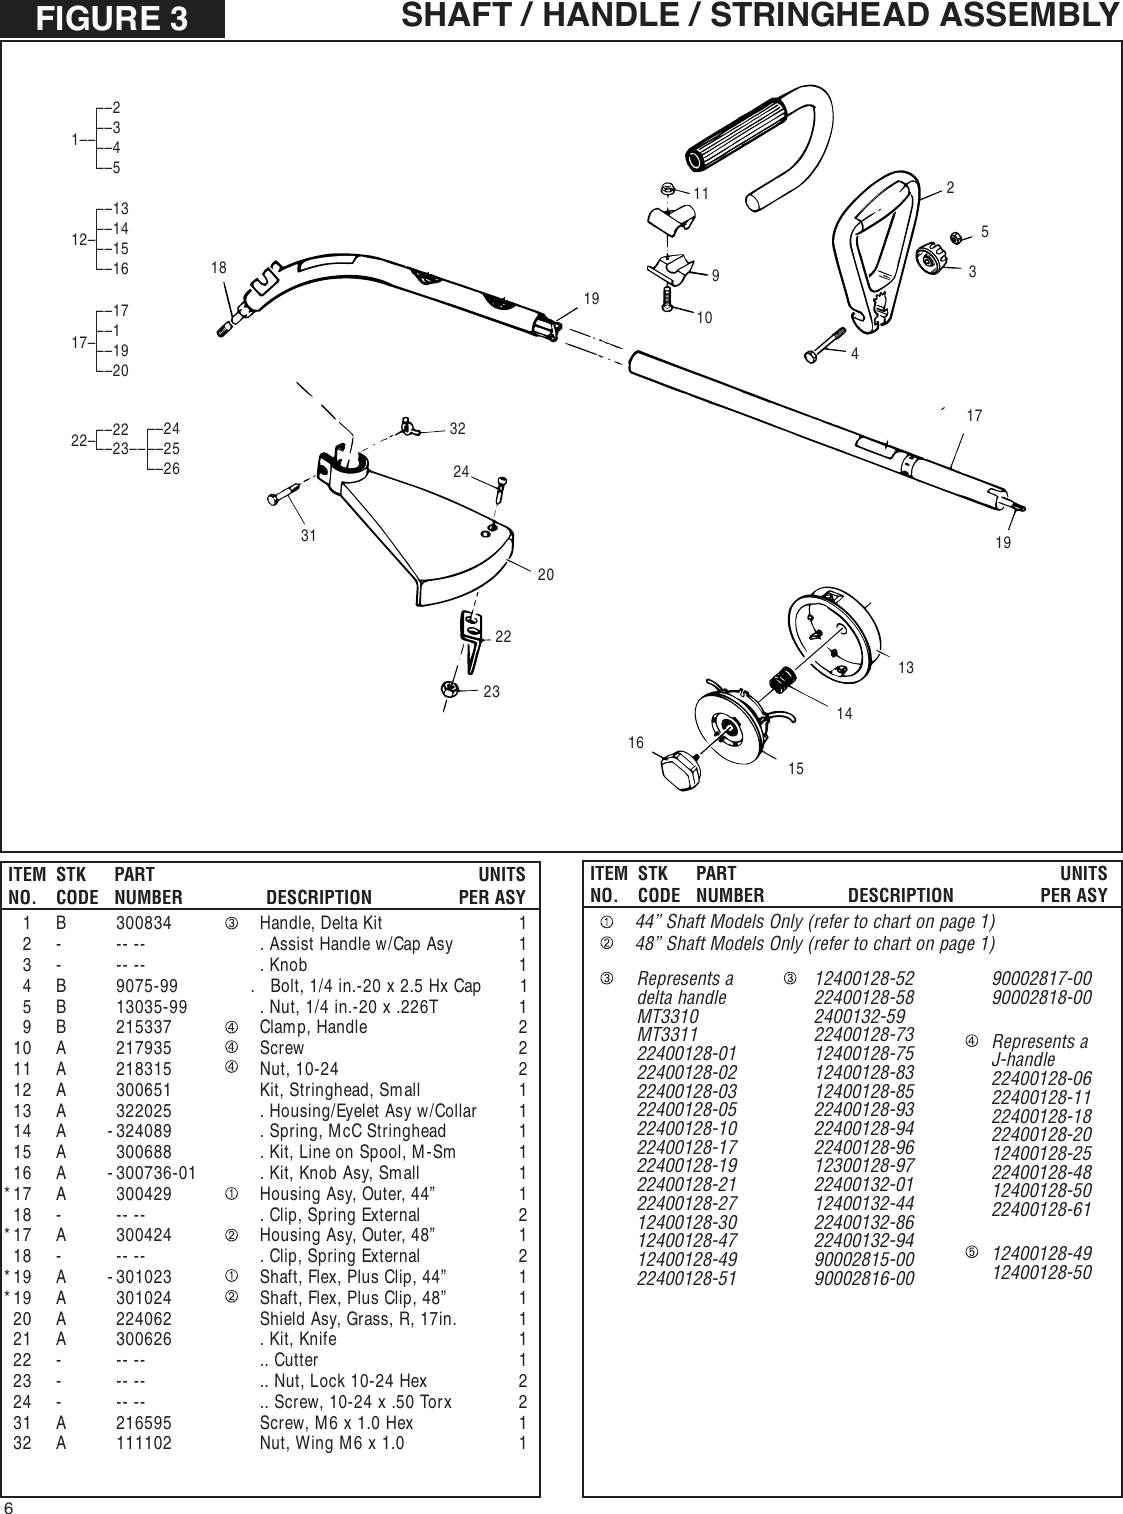 Page 6 of 8 - Mcculloch Mcculloch-28Cc-Illustrated-Parts-Breakdown- ManualsLib - Makes It Easy To Find Manuals Online!  Mcculloch-28cc-illustrated-parts-breakdown